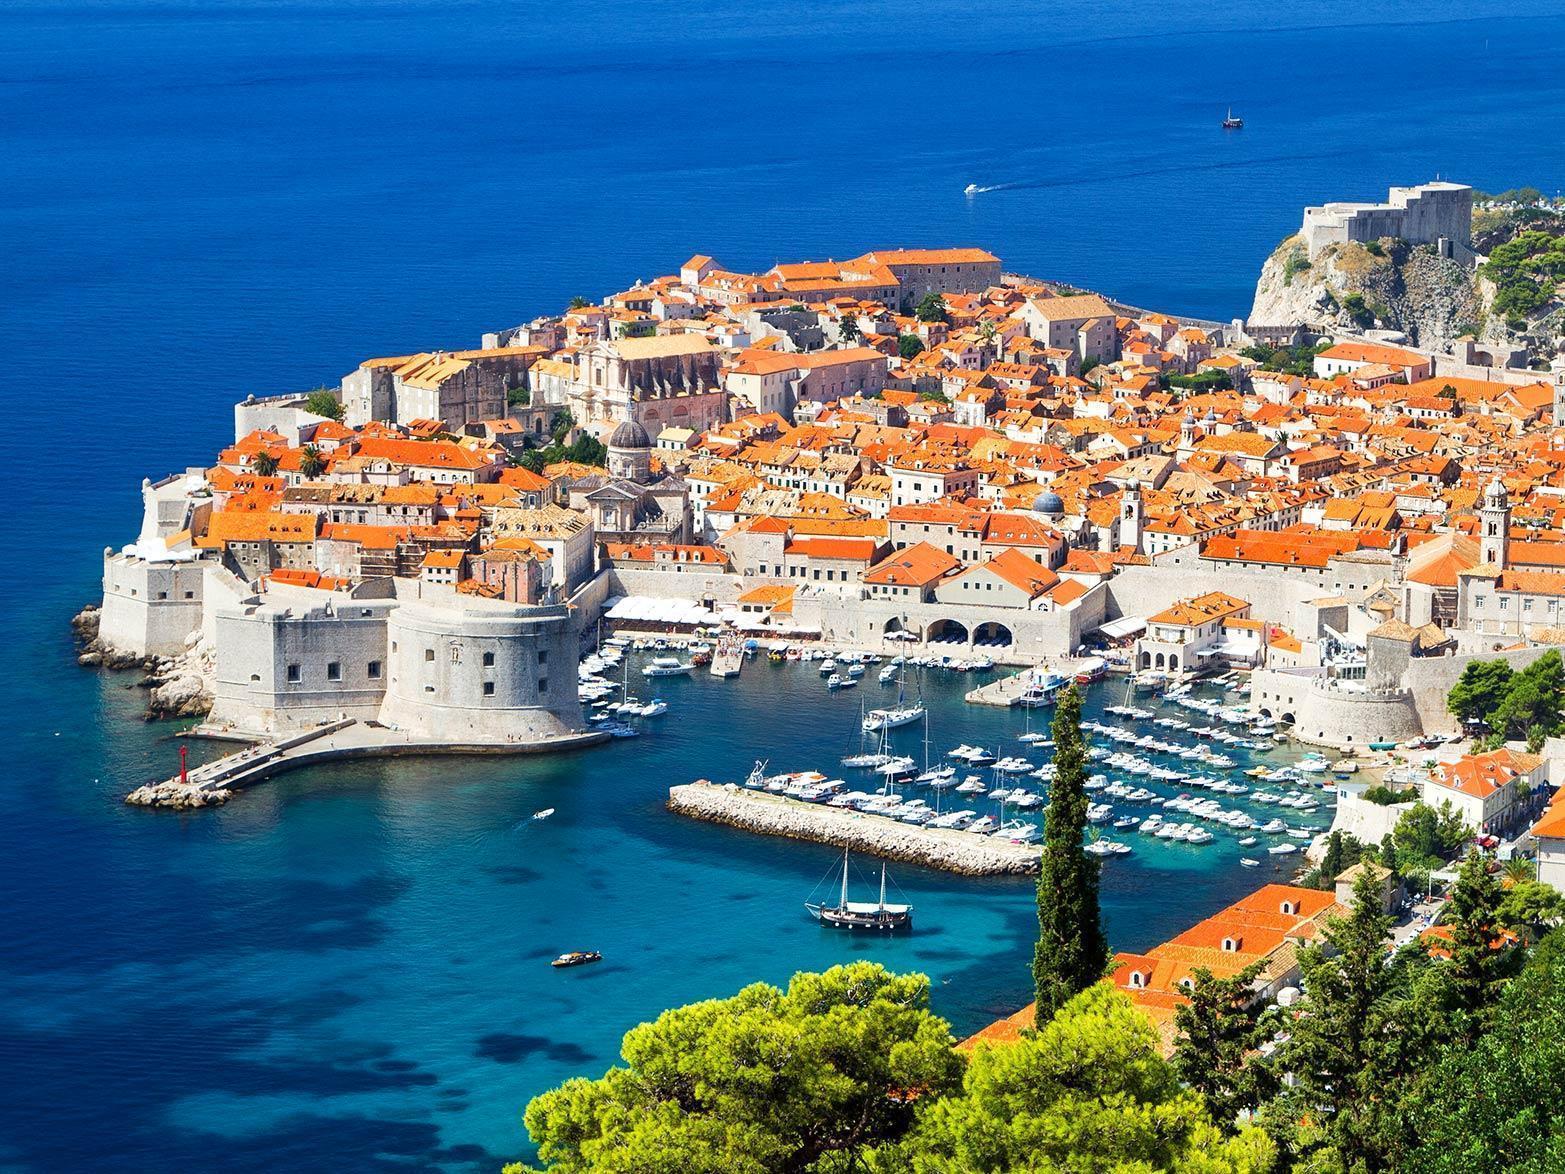 Town of Dubrovnik with Prime transfer